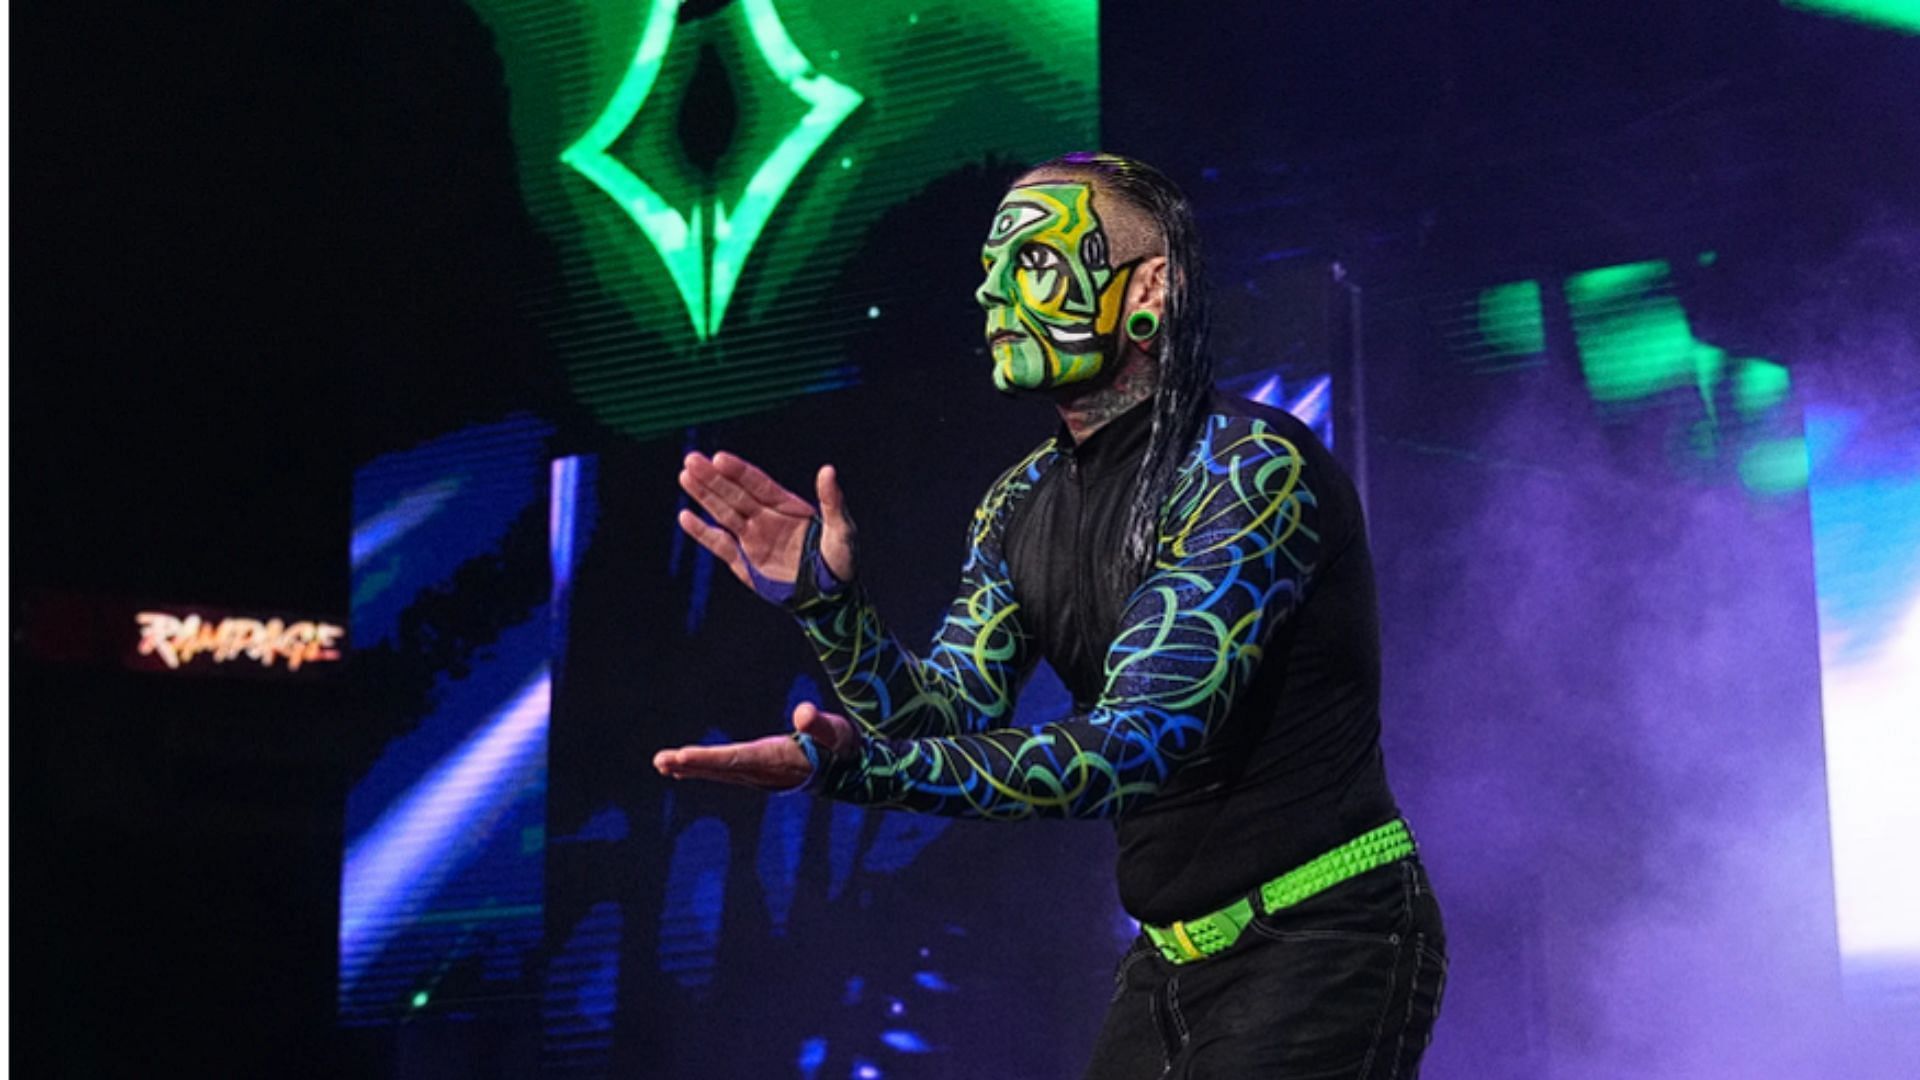 Jeff Hardy is a former WWE World Heavyweight Champion who is now with AEW [Photo courtesy of AEW